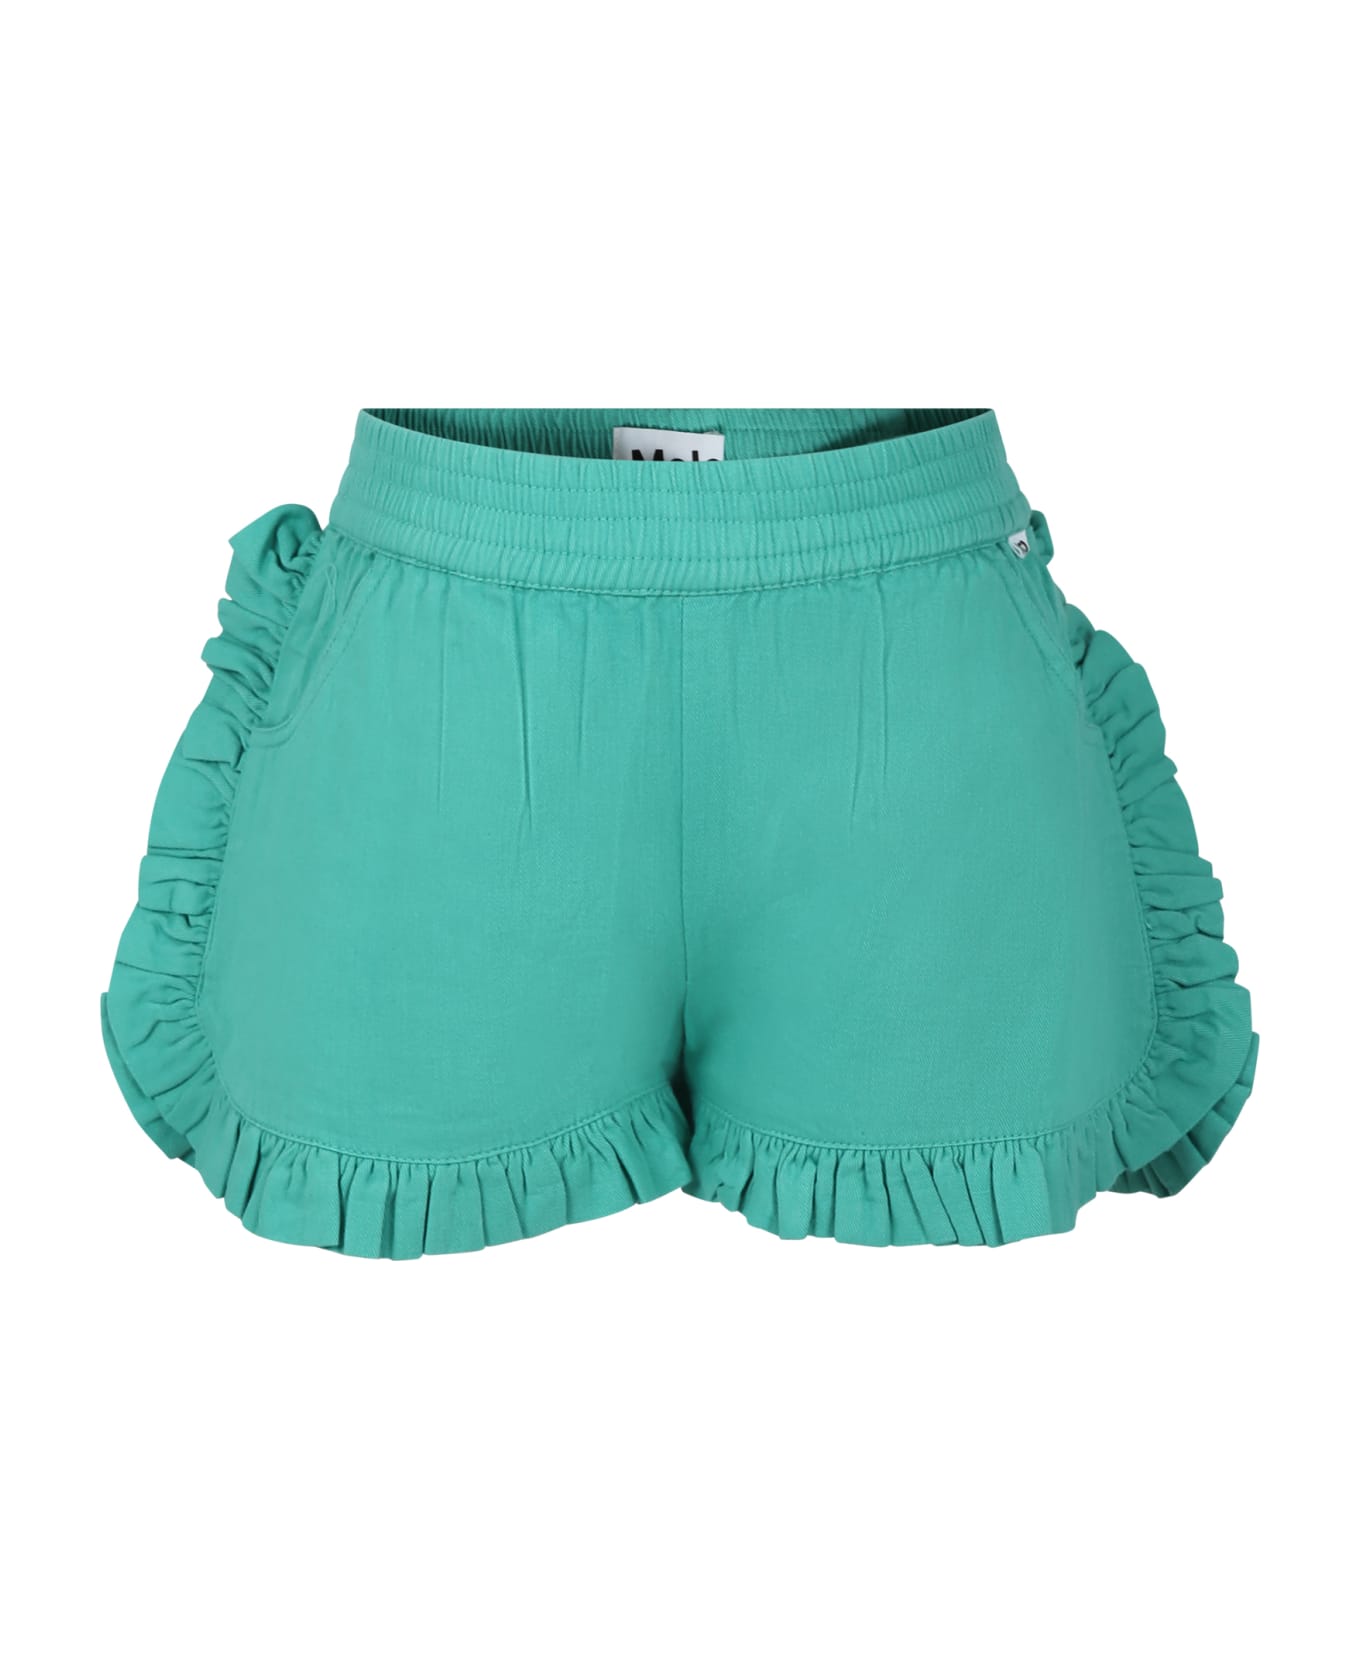 Molo Green Sports Shorts For Girl - Green ボトムス